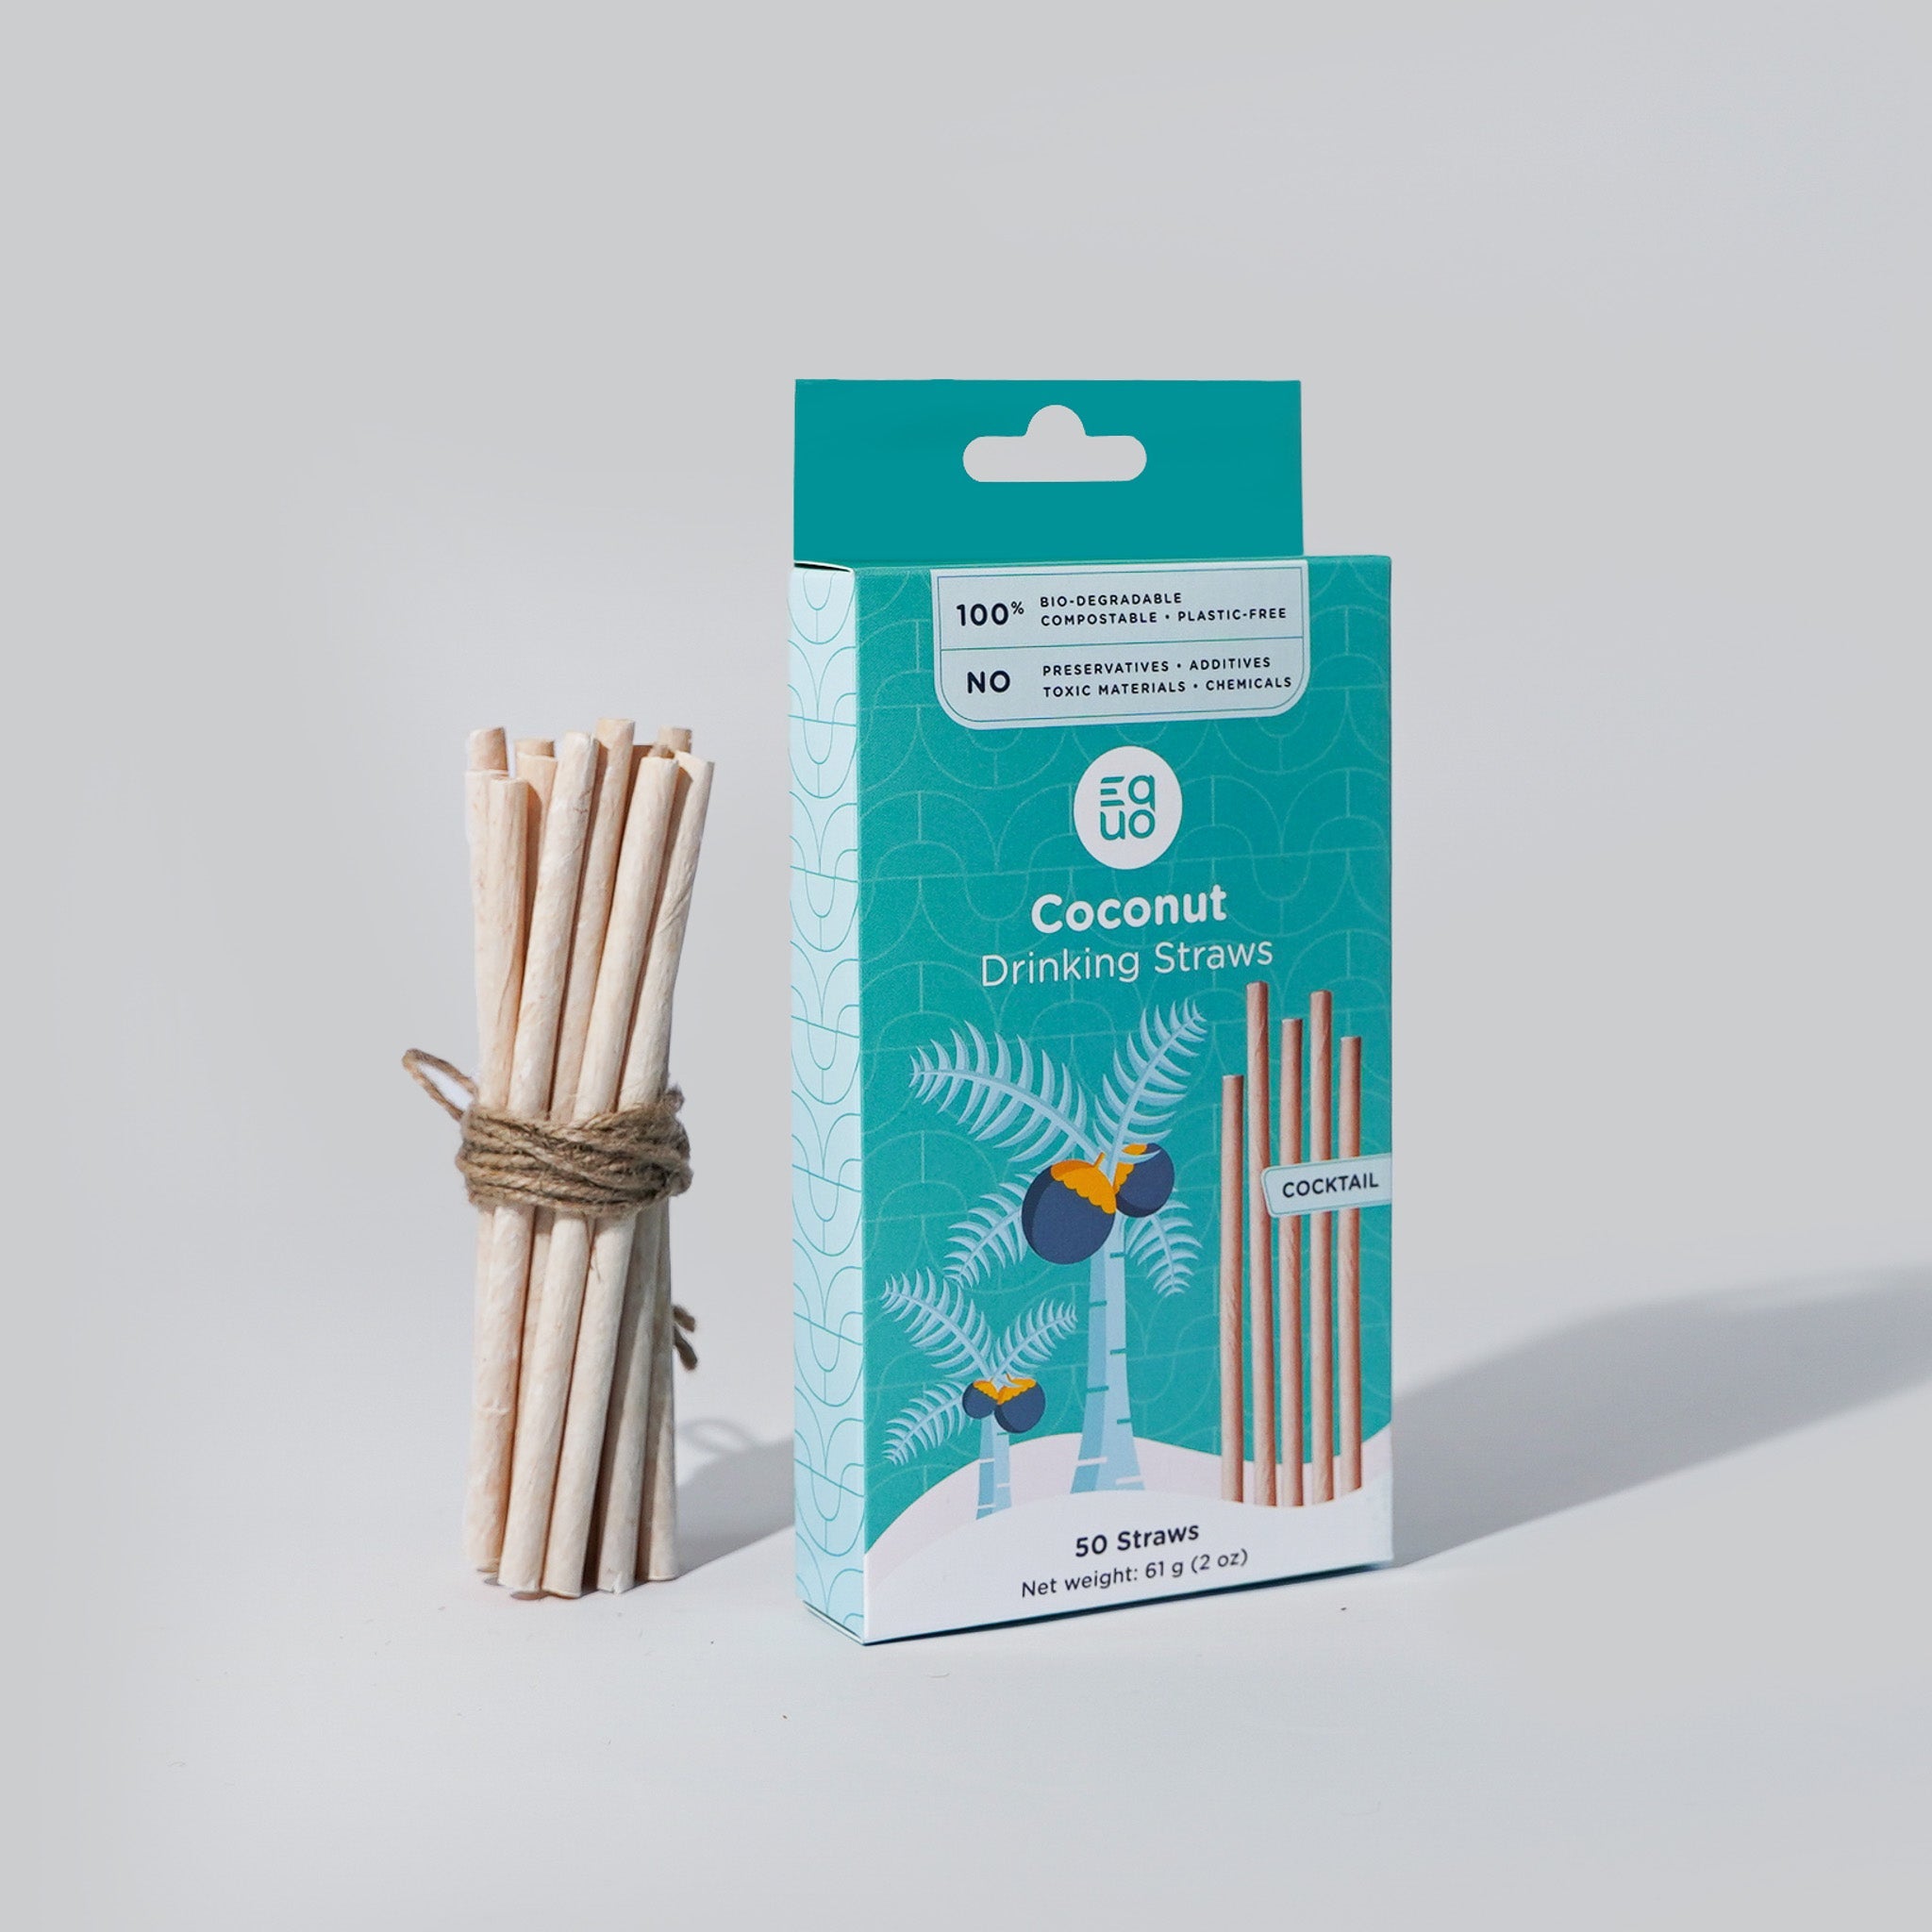 Coconut Drinking Straws by EQUO